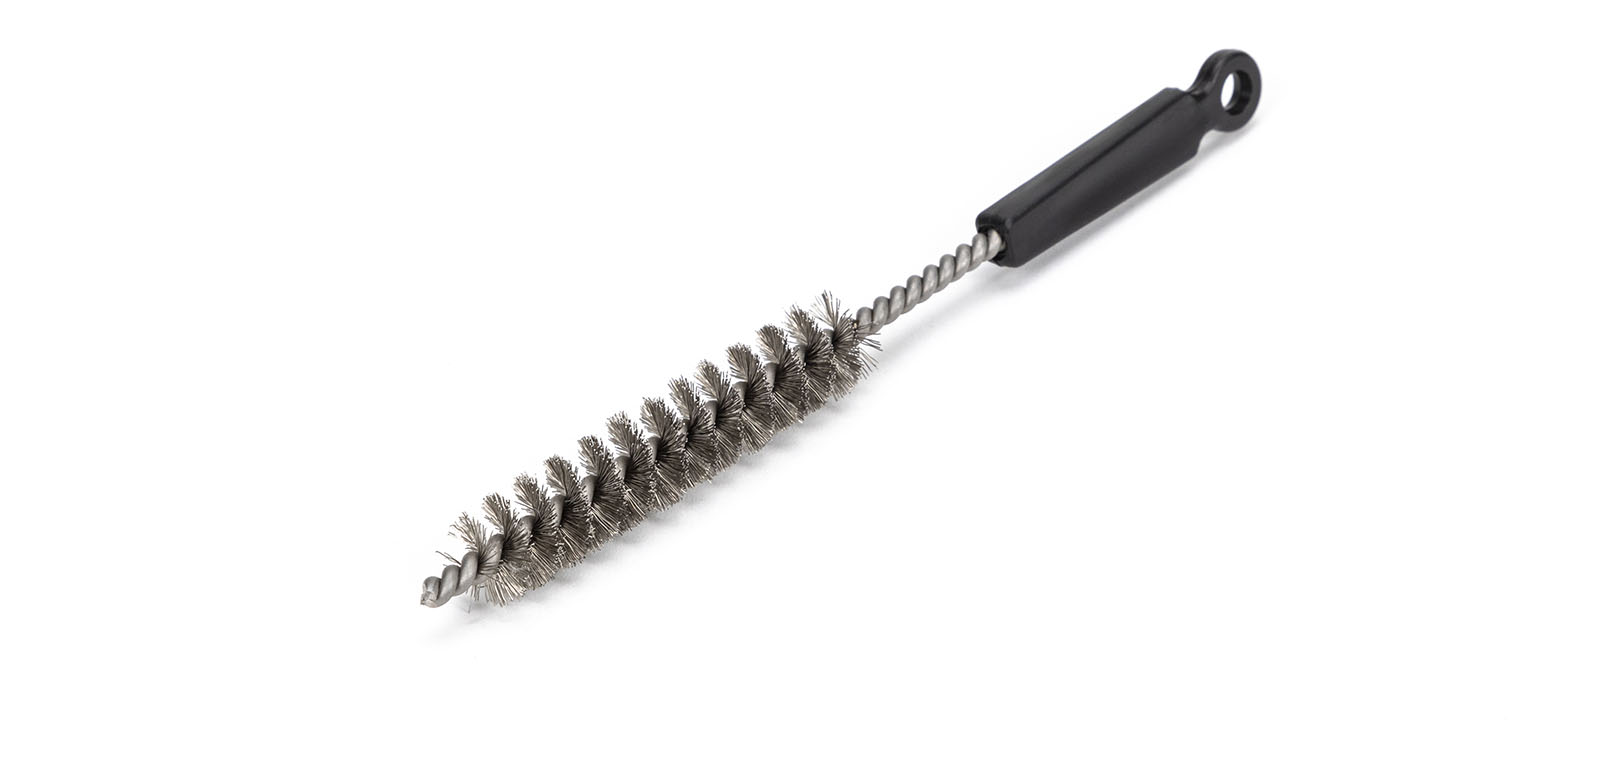 CL8297 - Cleaning Brush for DS360 & DT530